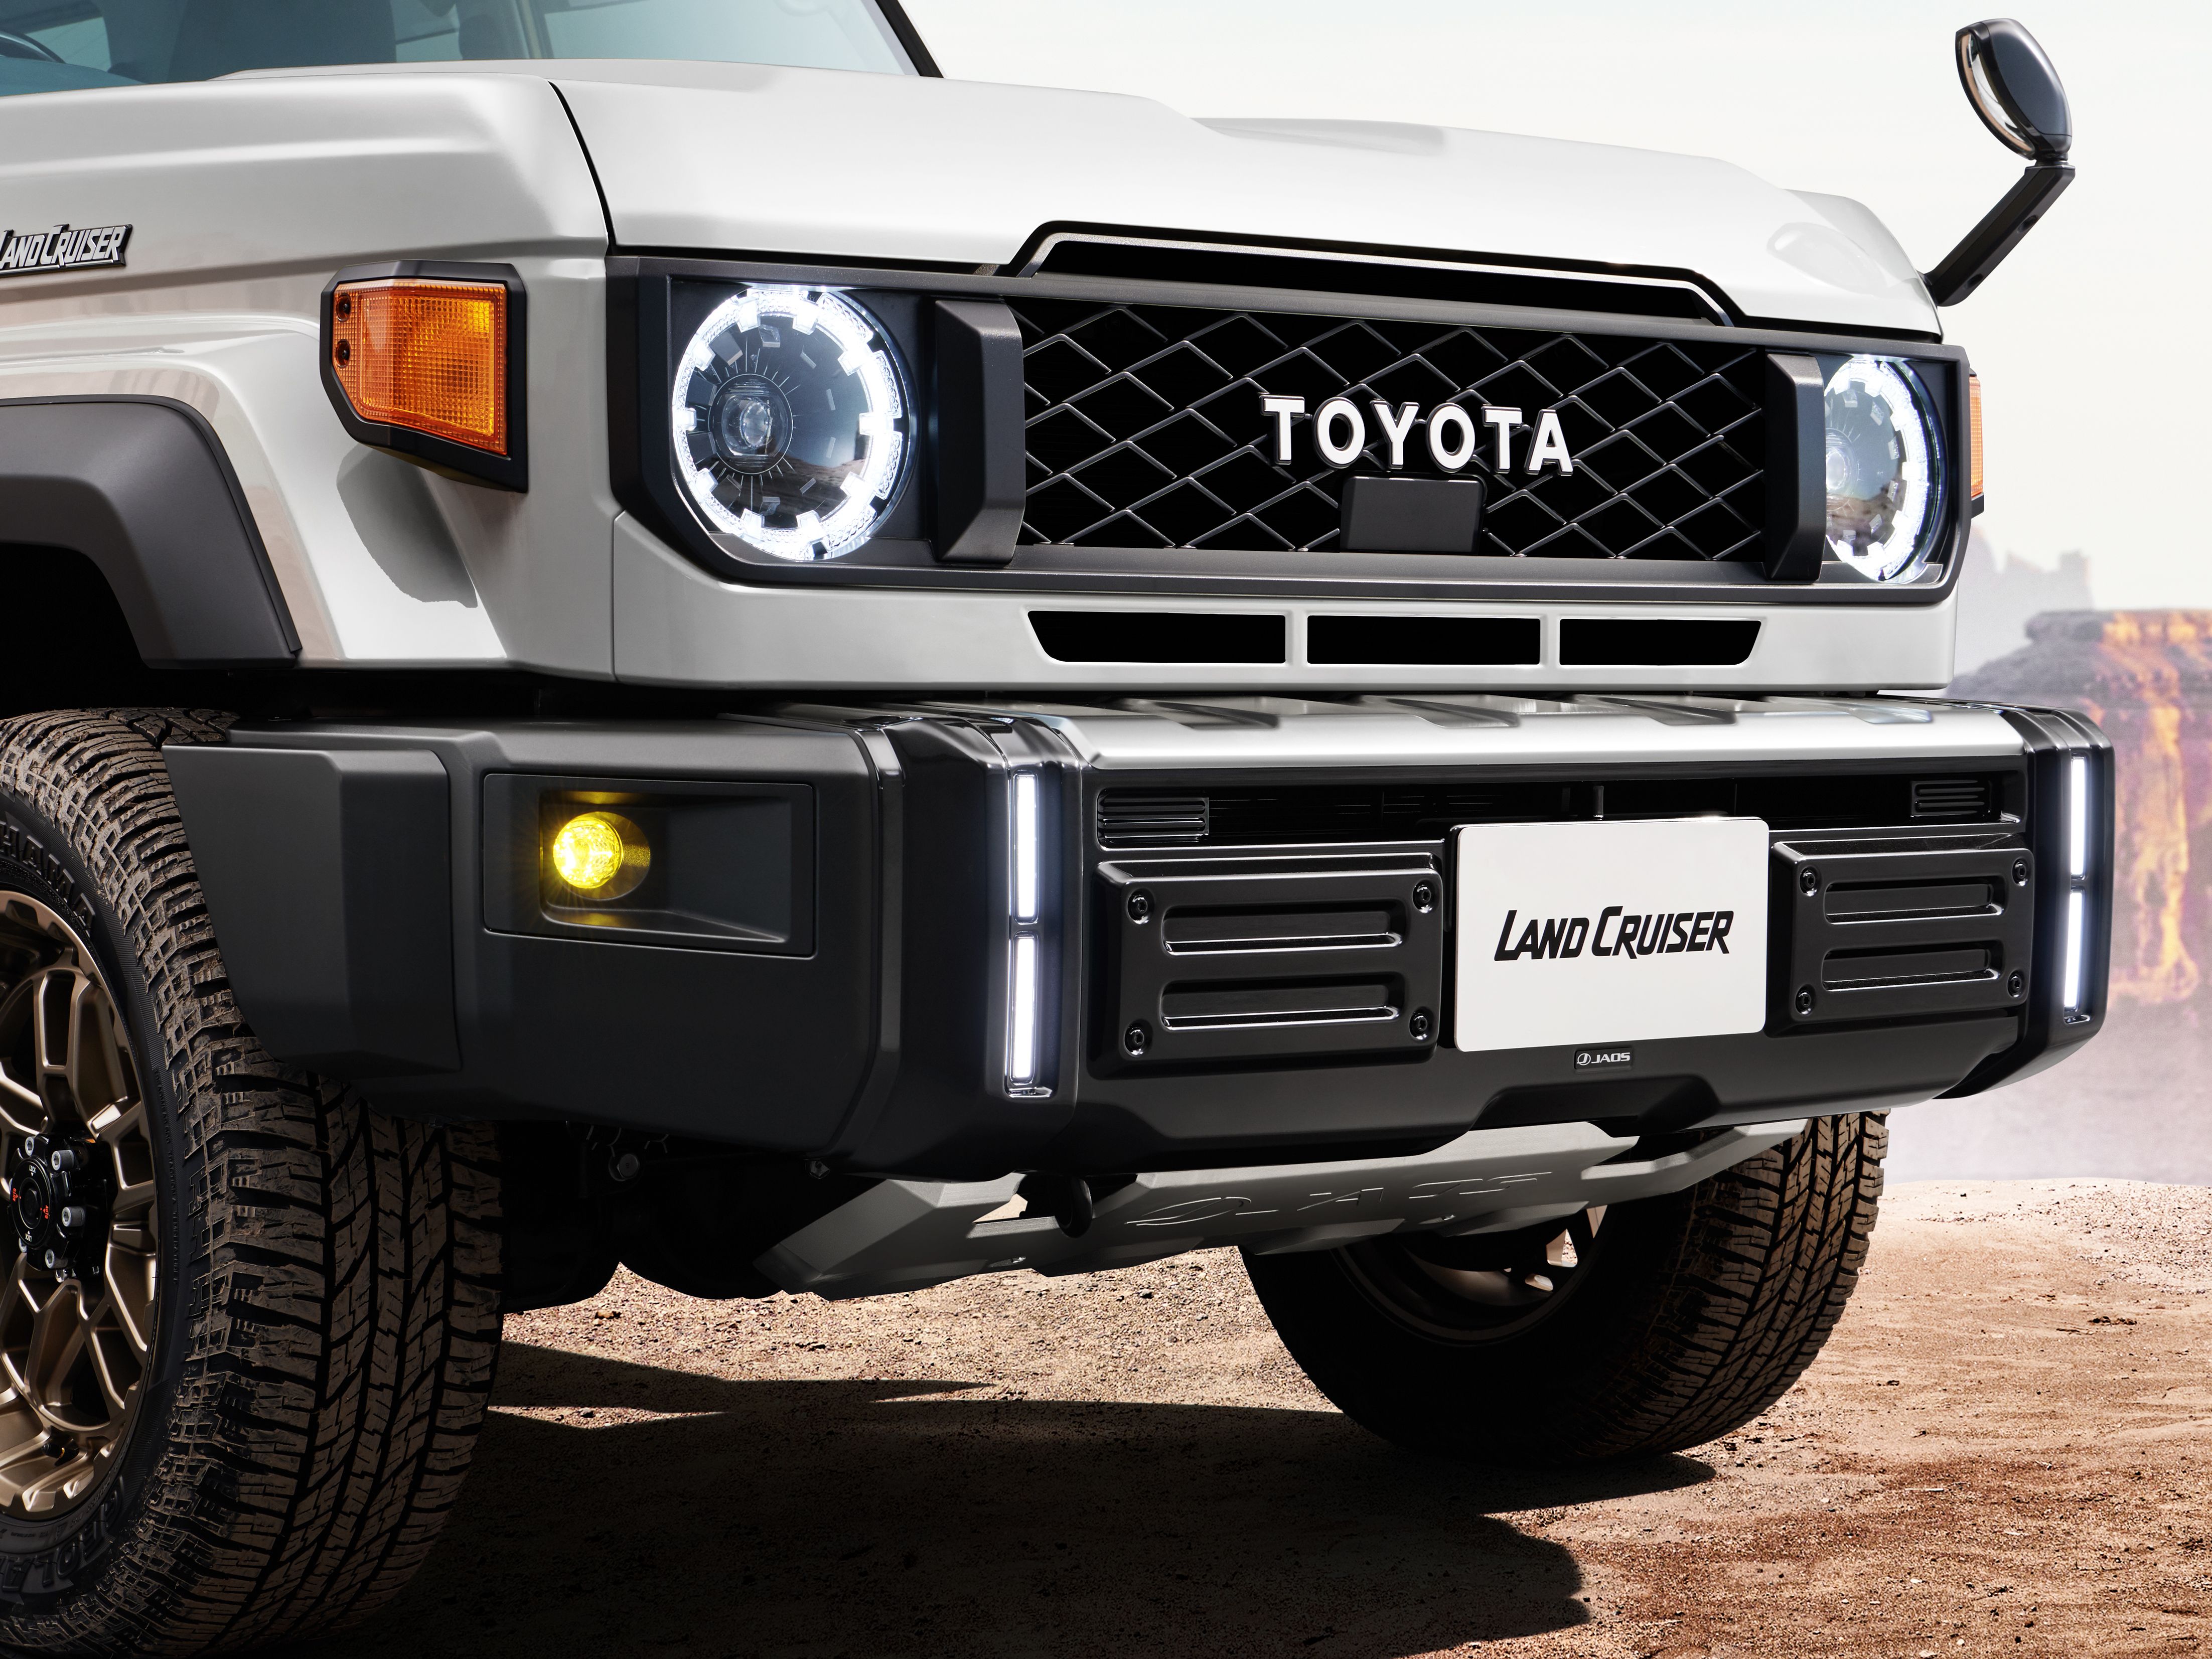 Diesel V8 Toyota Land Cruiser 70 Series to be Discontinued